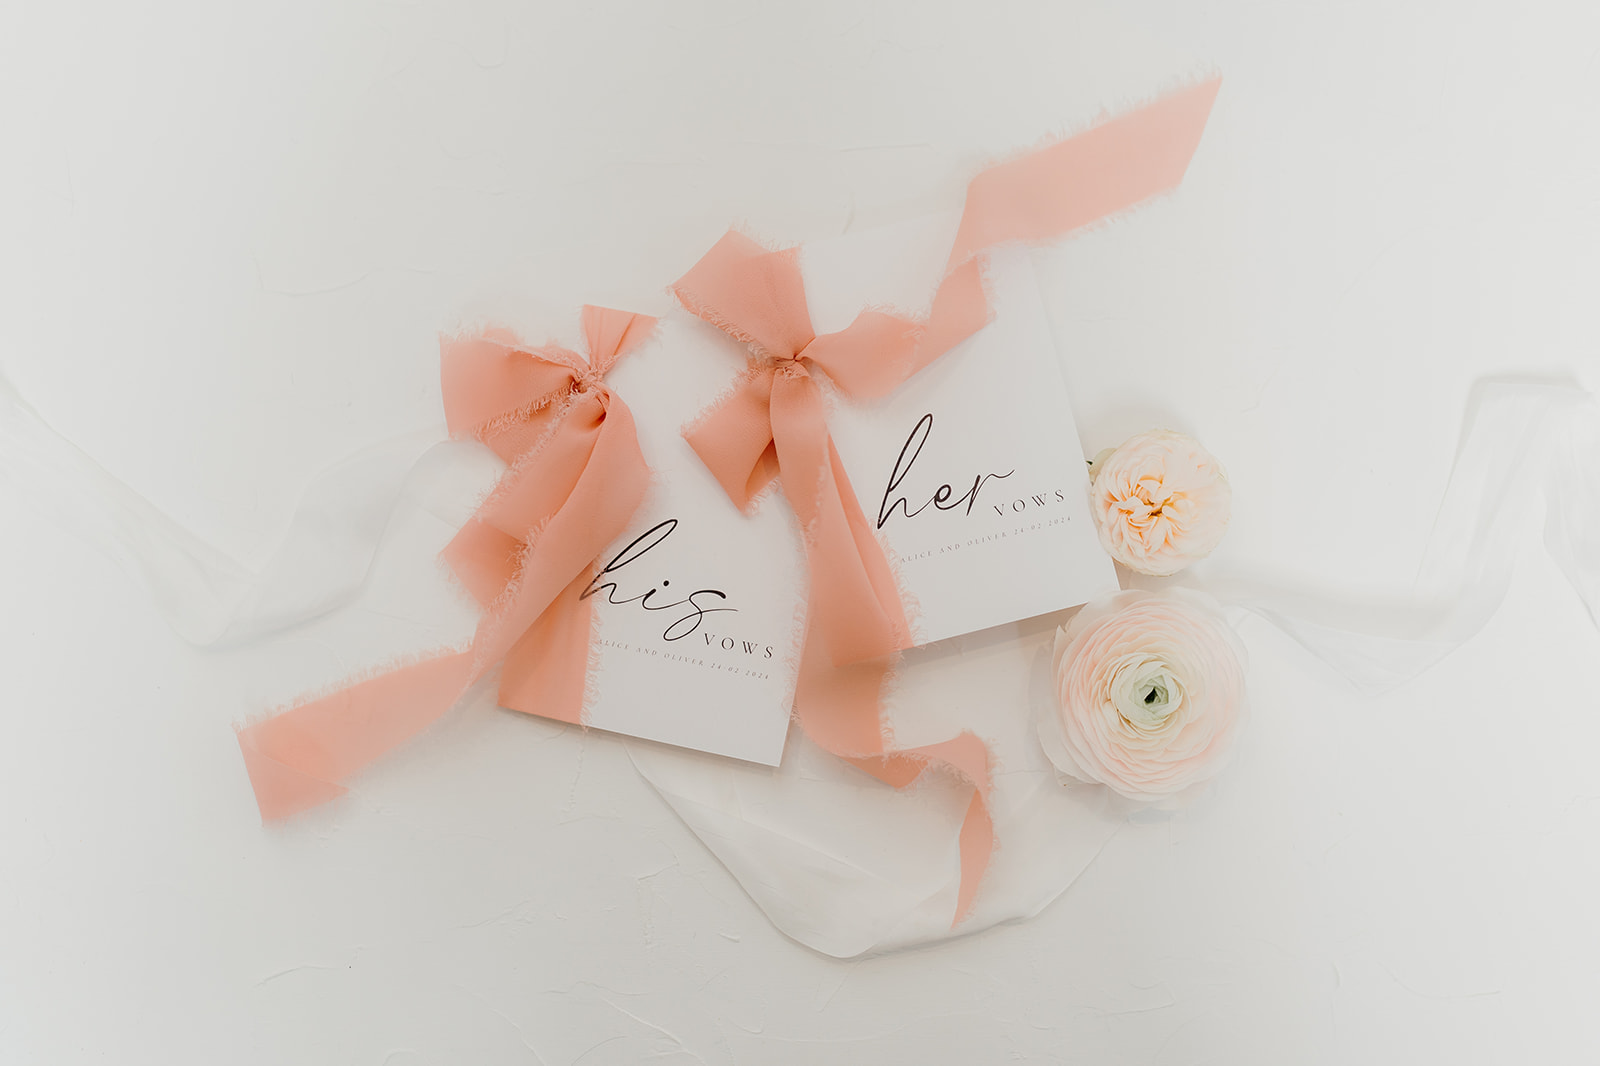 His and hers vow books in peach tones